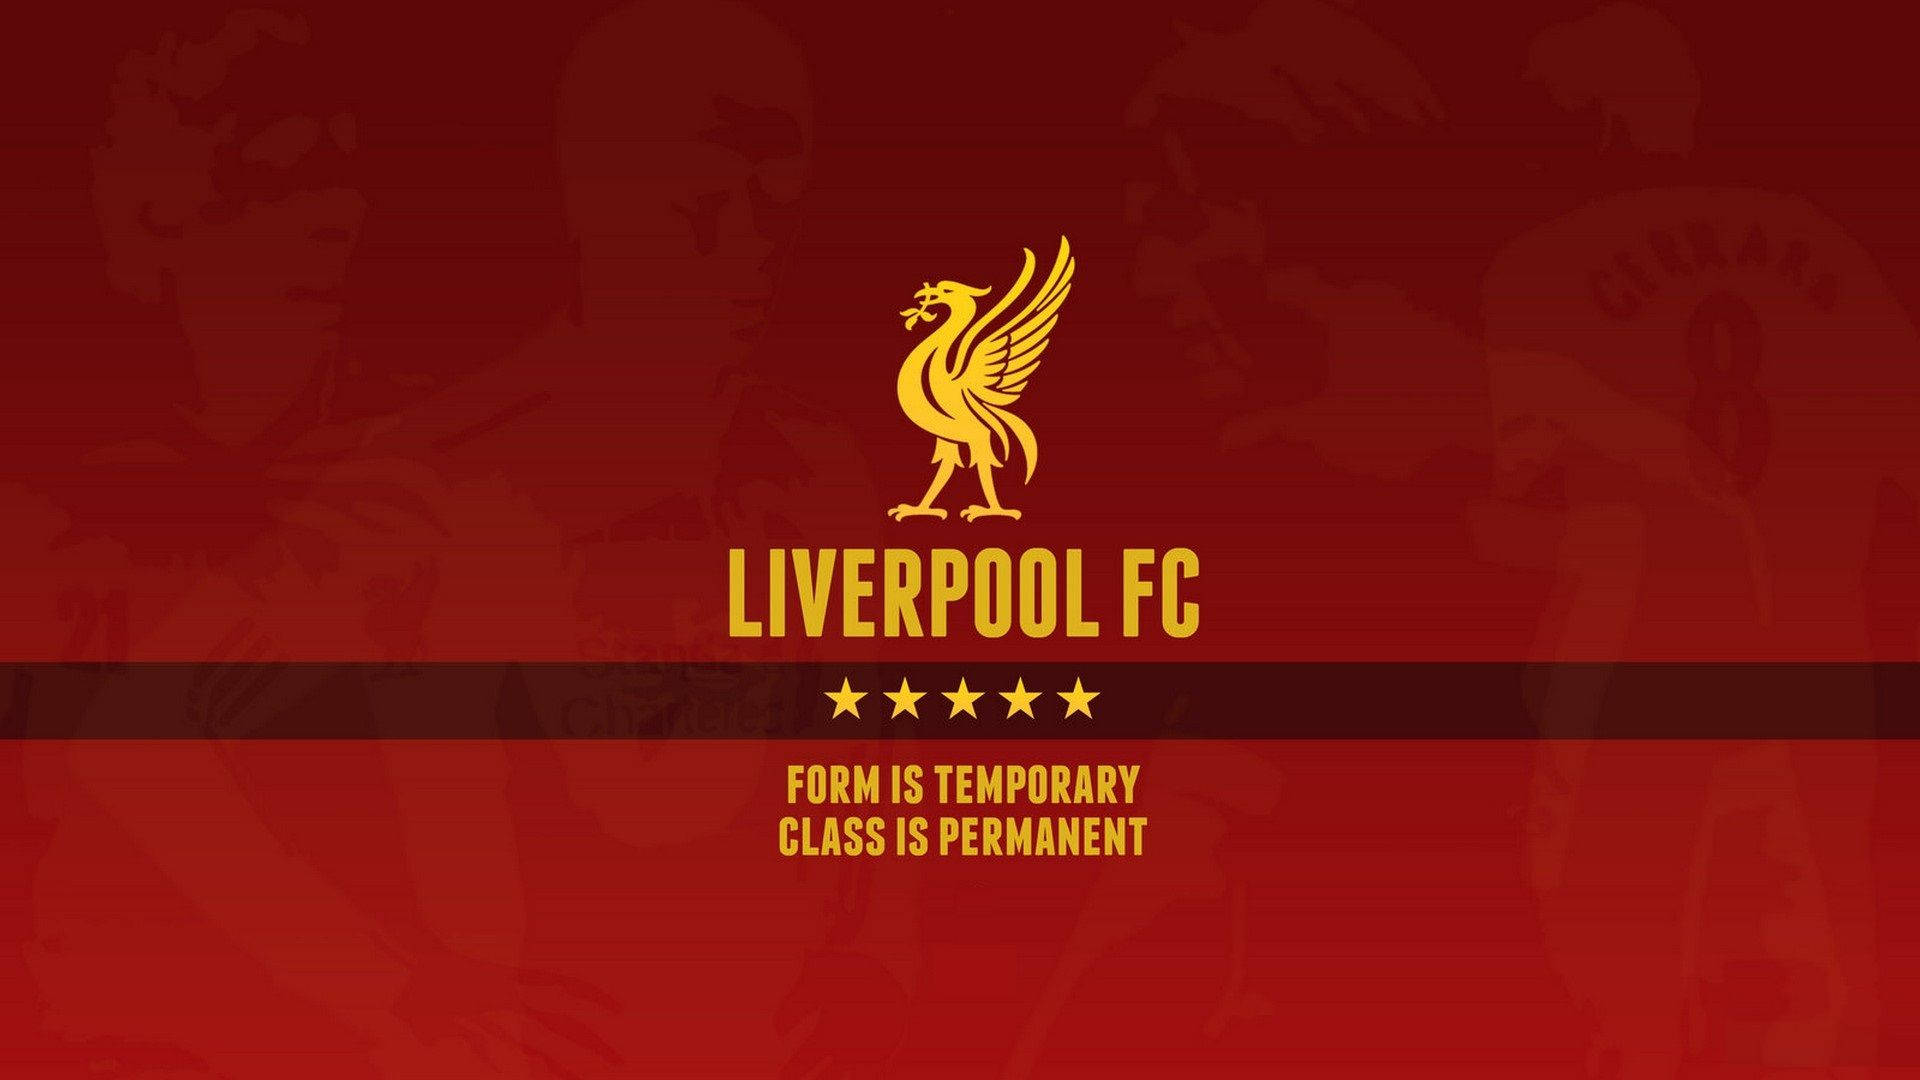 Classic Red And Gold Liverpool Fc Background